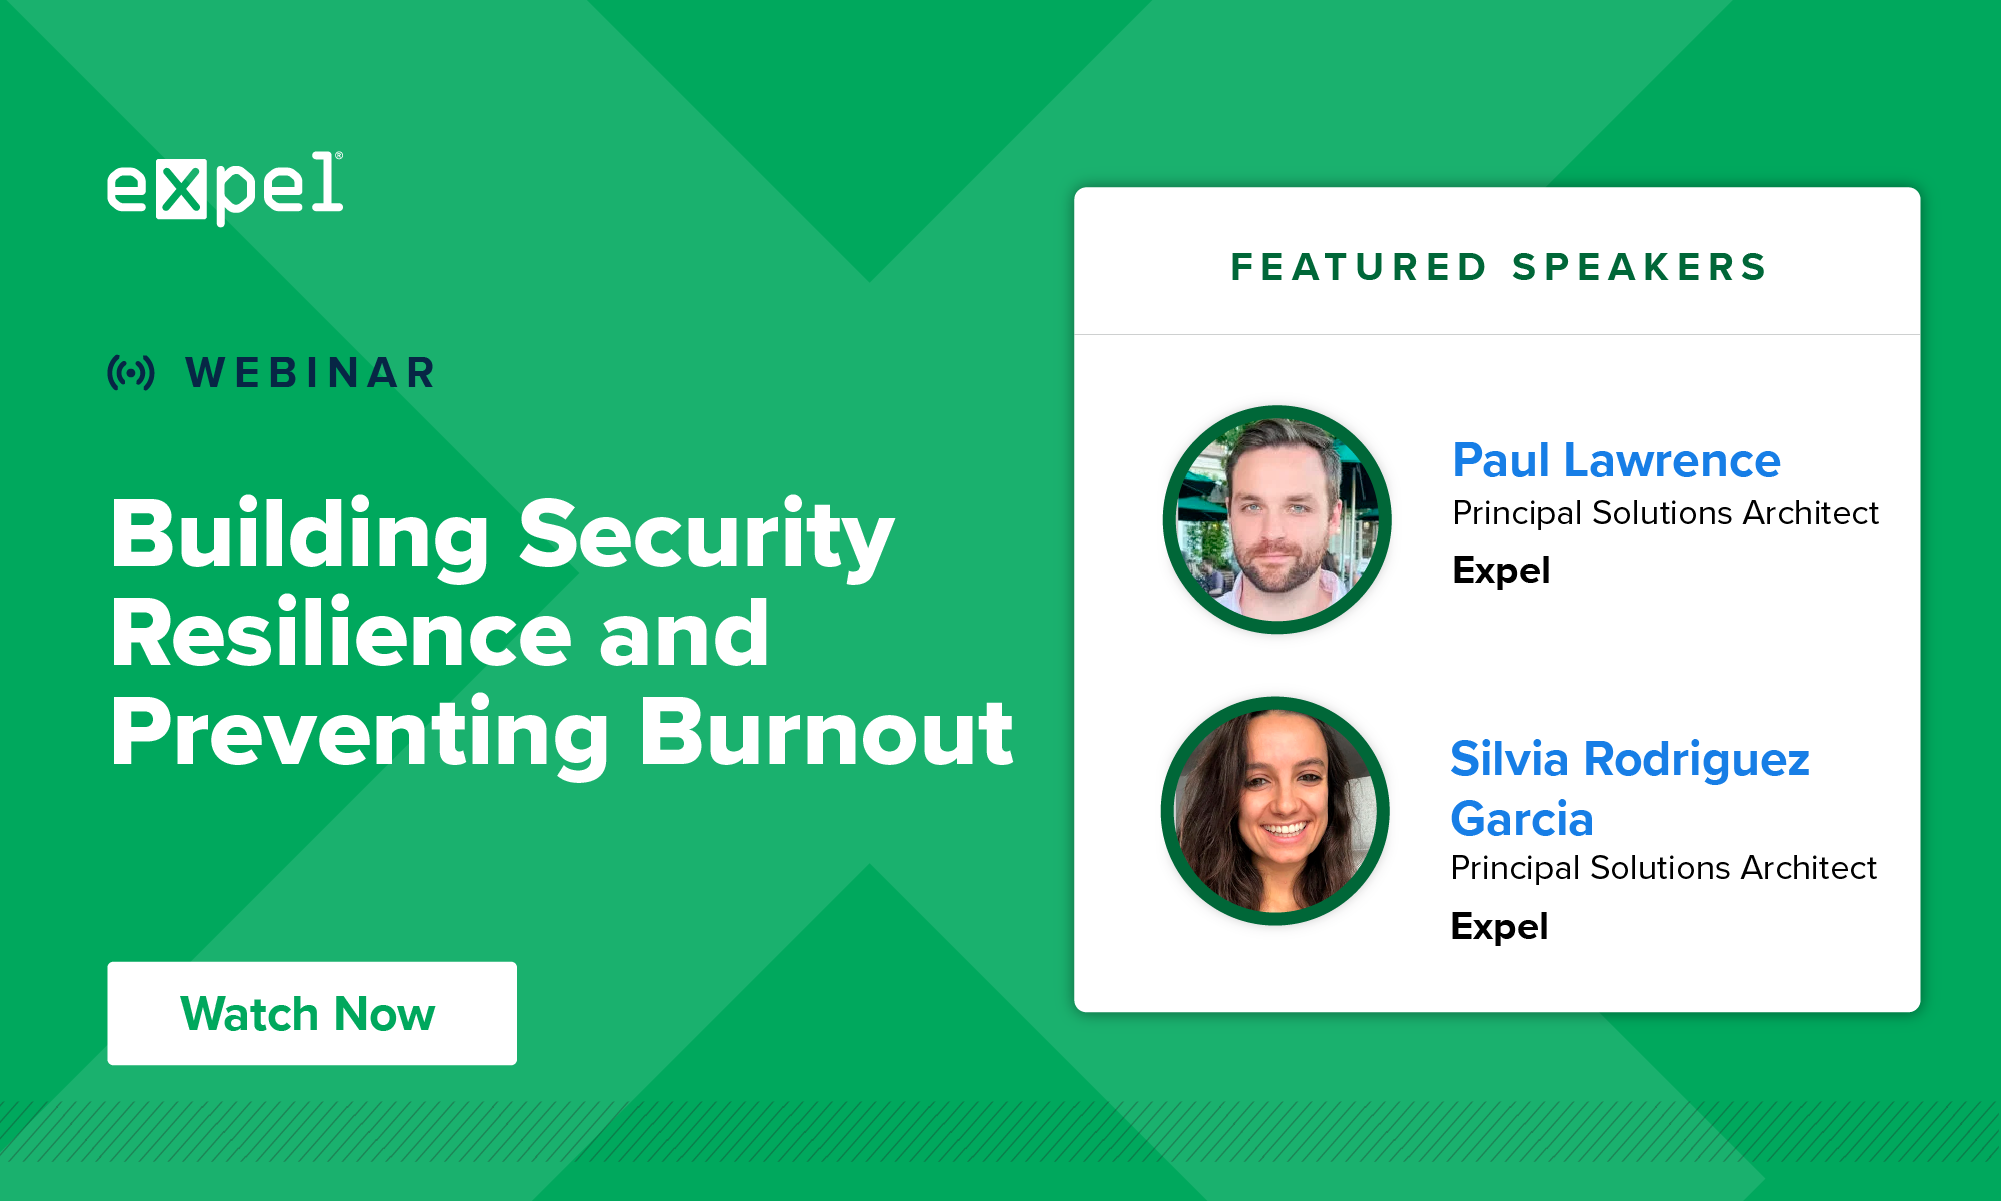 Building Security Resilience and Preventing Burnout